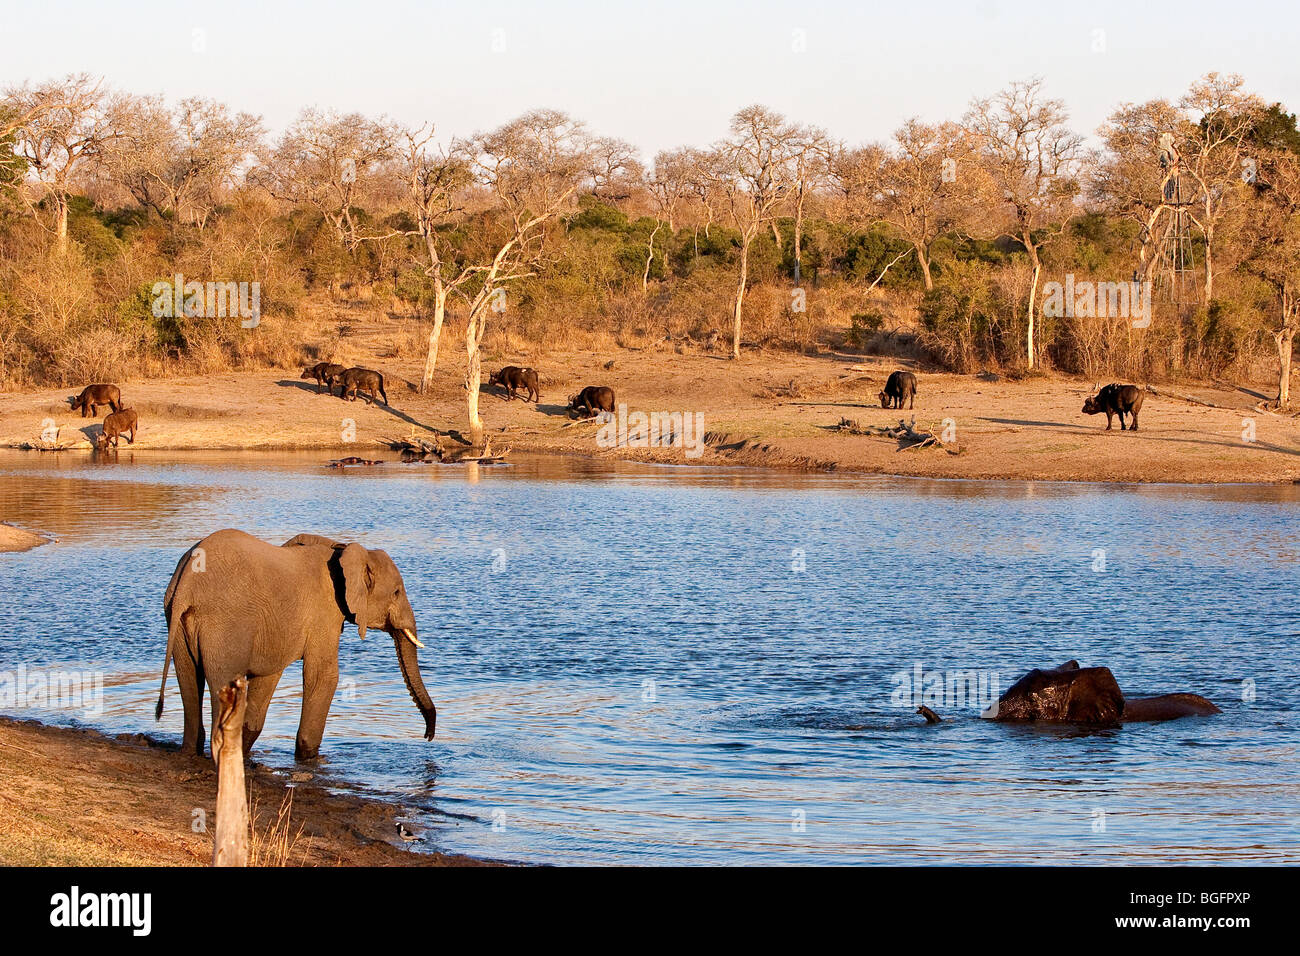 Elephants drinking and swimming with buffalo at a waterhole Stock Photo